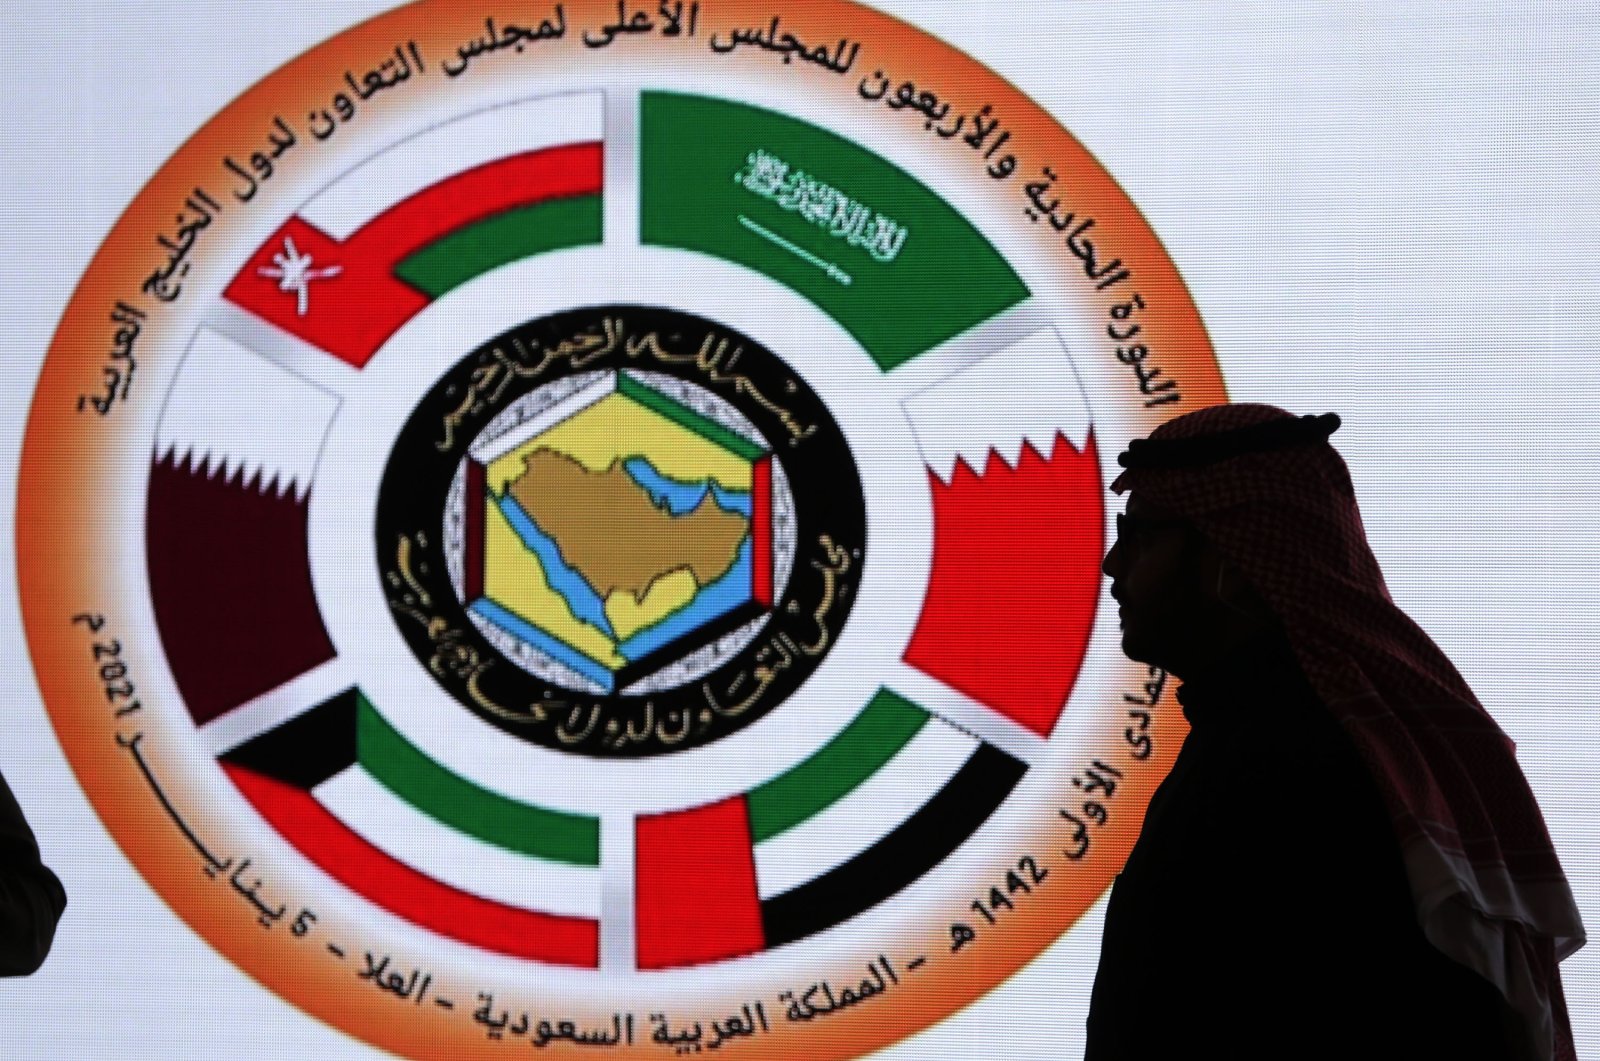 A Saudi television anchor stands in front of the logo of the 41st Gulf Cooperation Council (GCC) at the media center in at Al Ula, Saudi Arabia, Tuesday, Jan. 5, 2021.  (AP Photo)